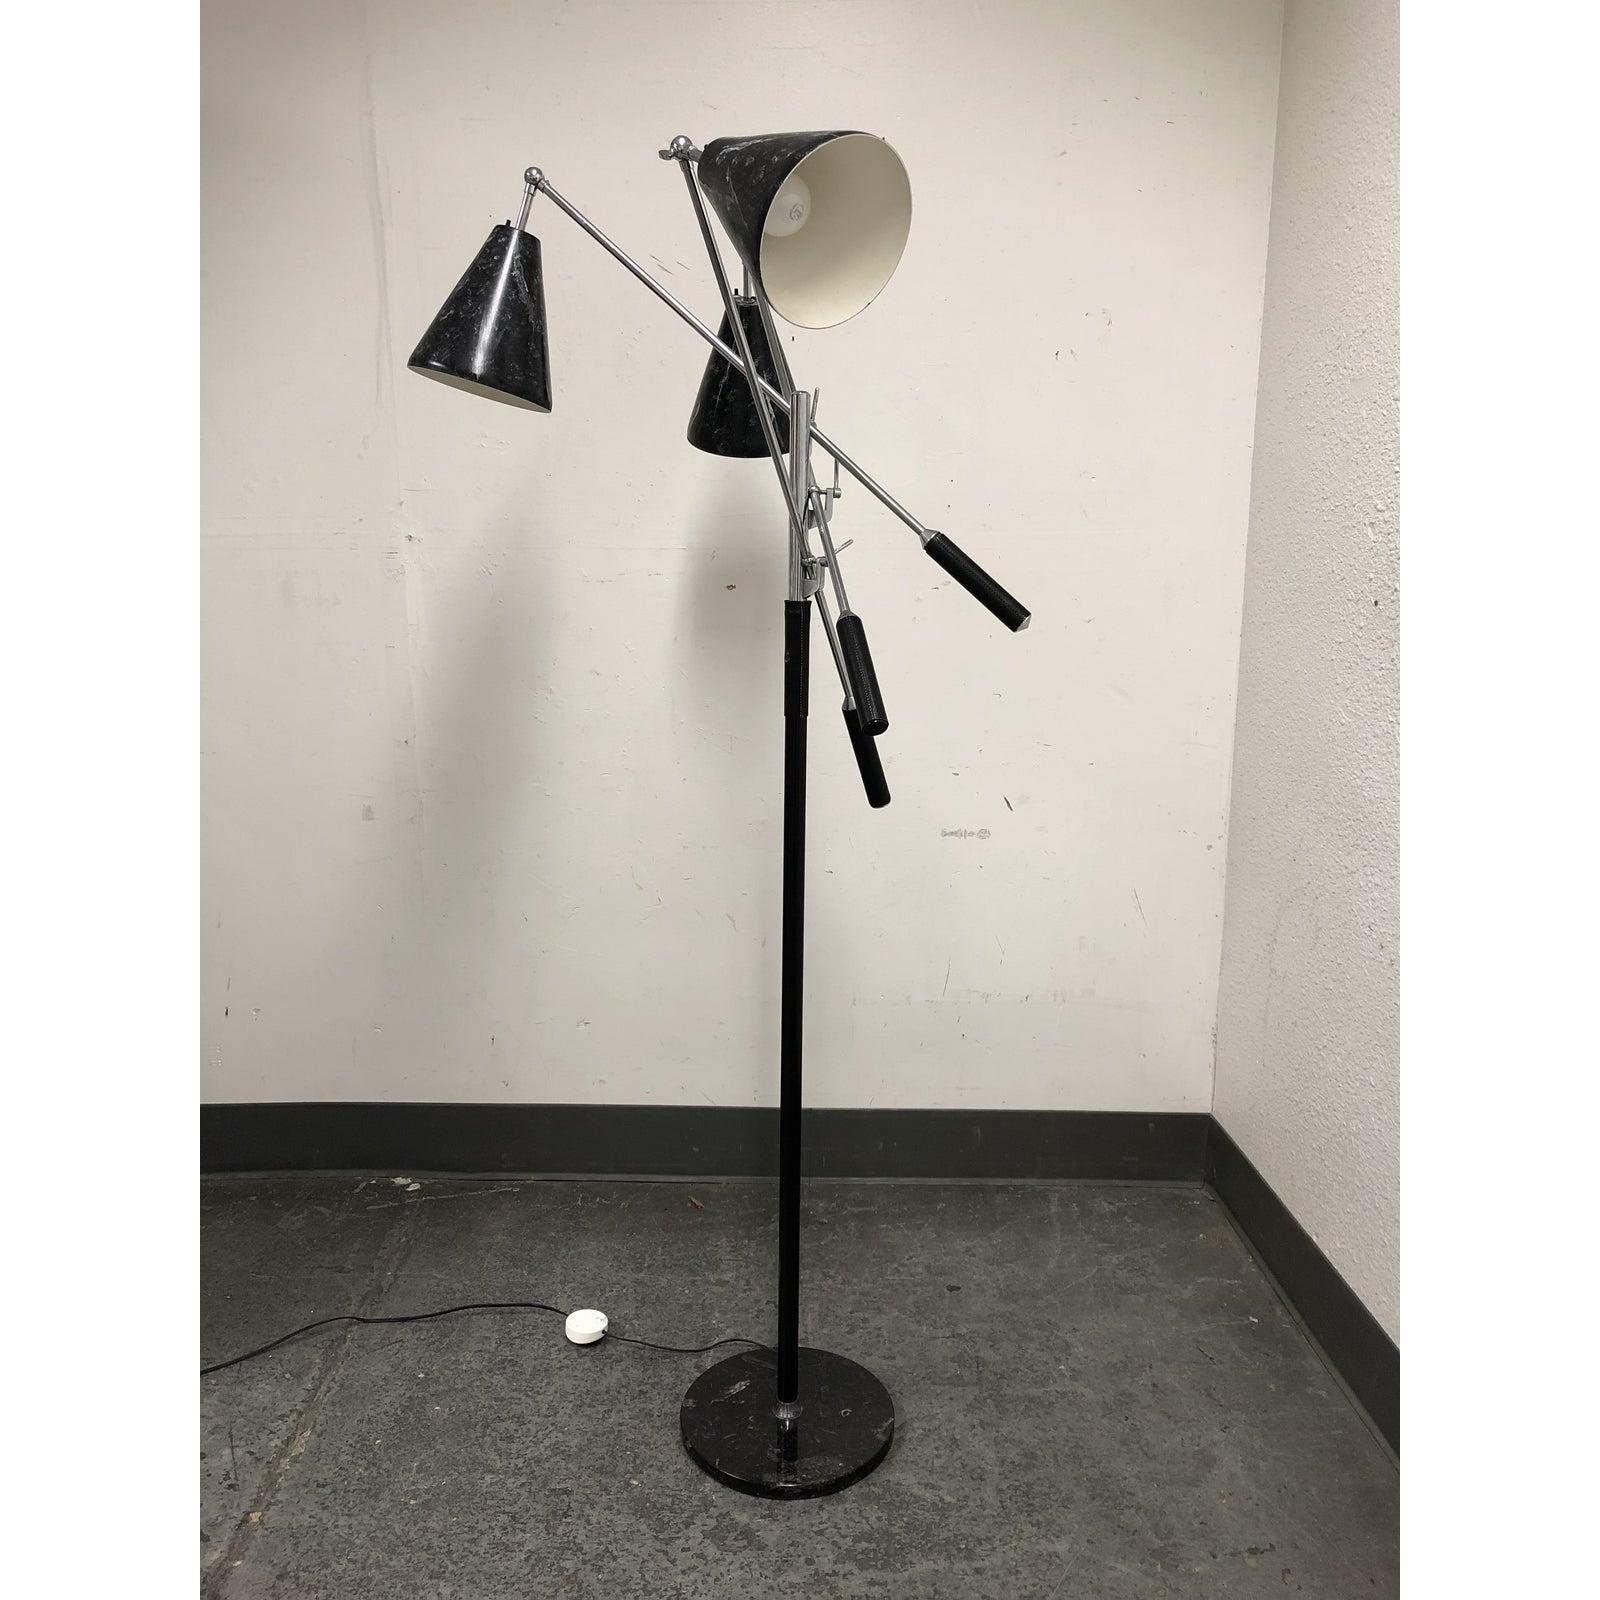 Presents a mid-20th century Triennale floor lamp. A design statement originally designed by Angelo Lelli for Arredoluce. Originally purchased in the 1960s. A three arm Triennale floor lamp with faux black and white marble cone shaped shades, chrome